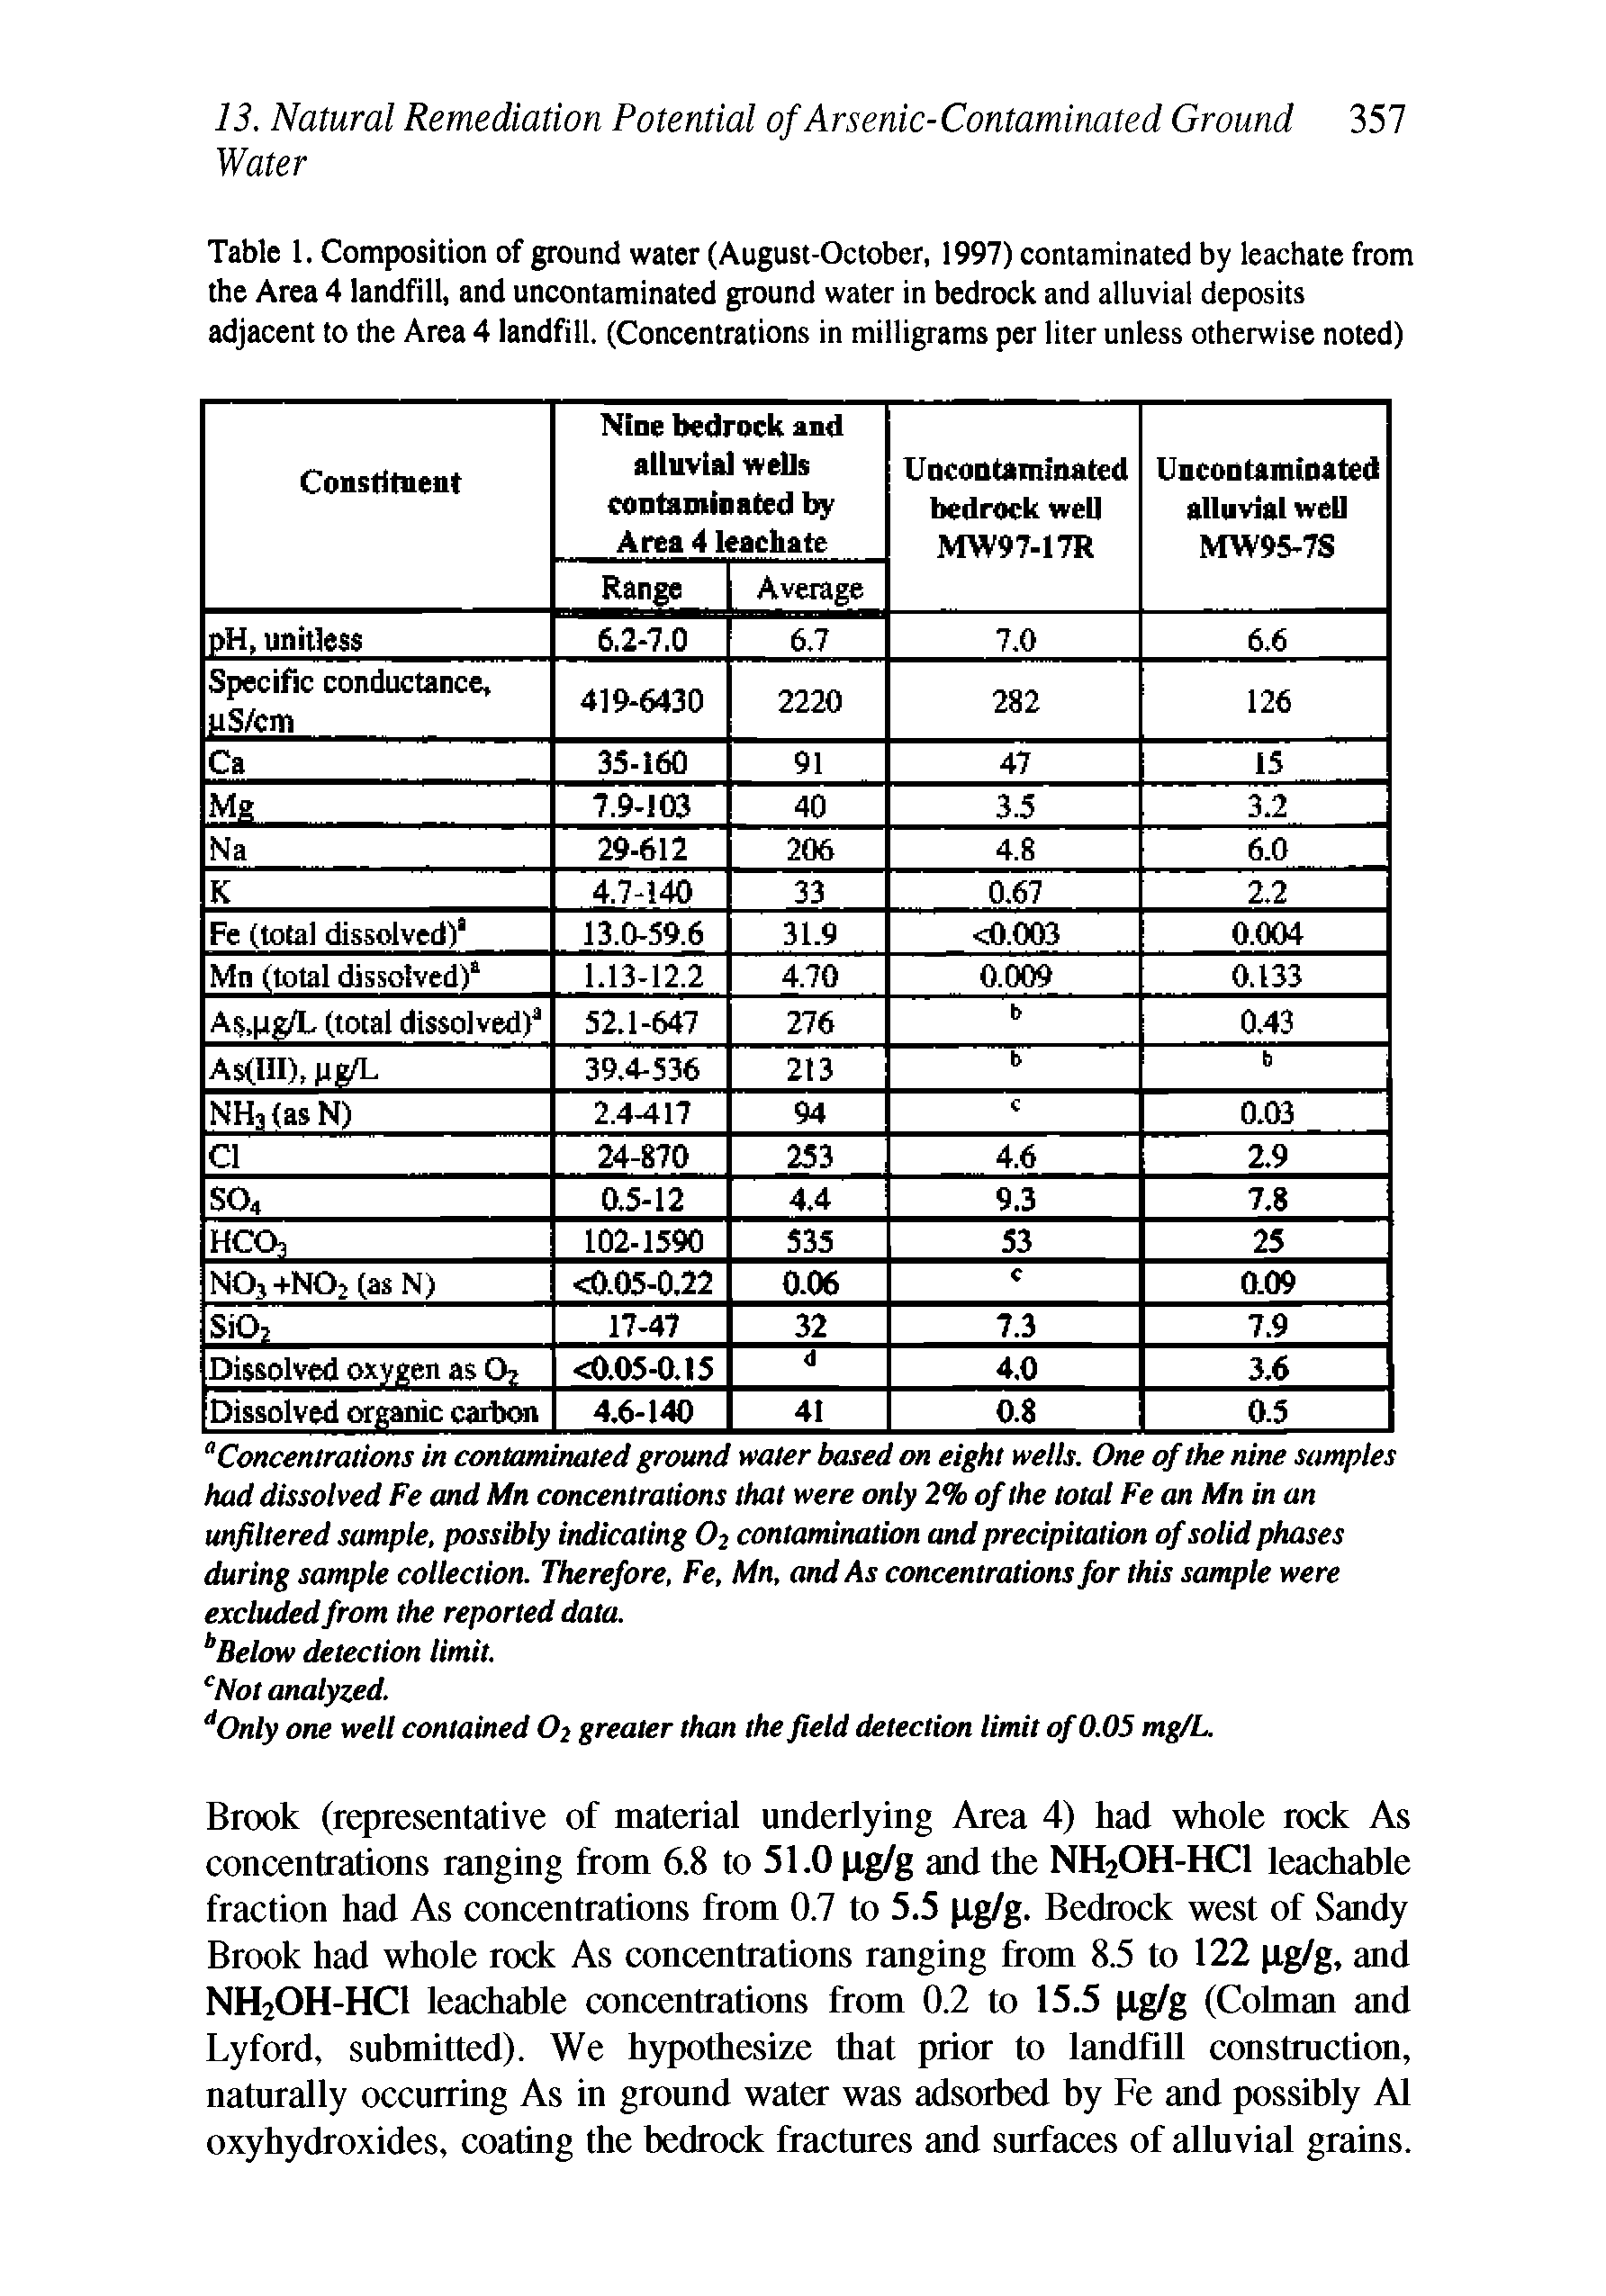 Table 1. Composition of ground water (August-October, 1997) contaminated by leachate from the Area 4 landfill, and uncontaminated ground water in bedrock and alluvial deposits adjacent to the Area 4 landfill. (Concentrations in milligrams per liter unless otherwise noted)...